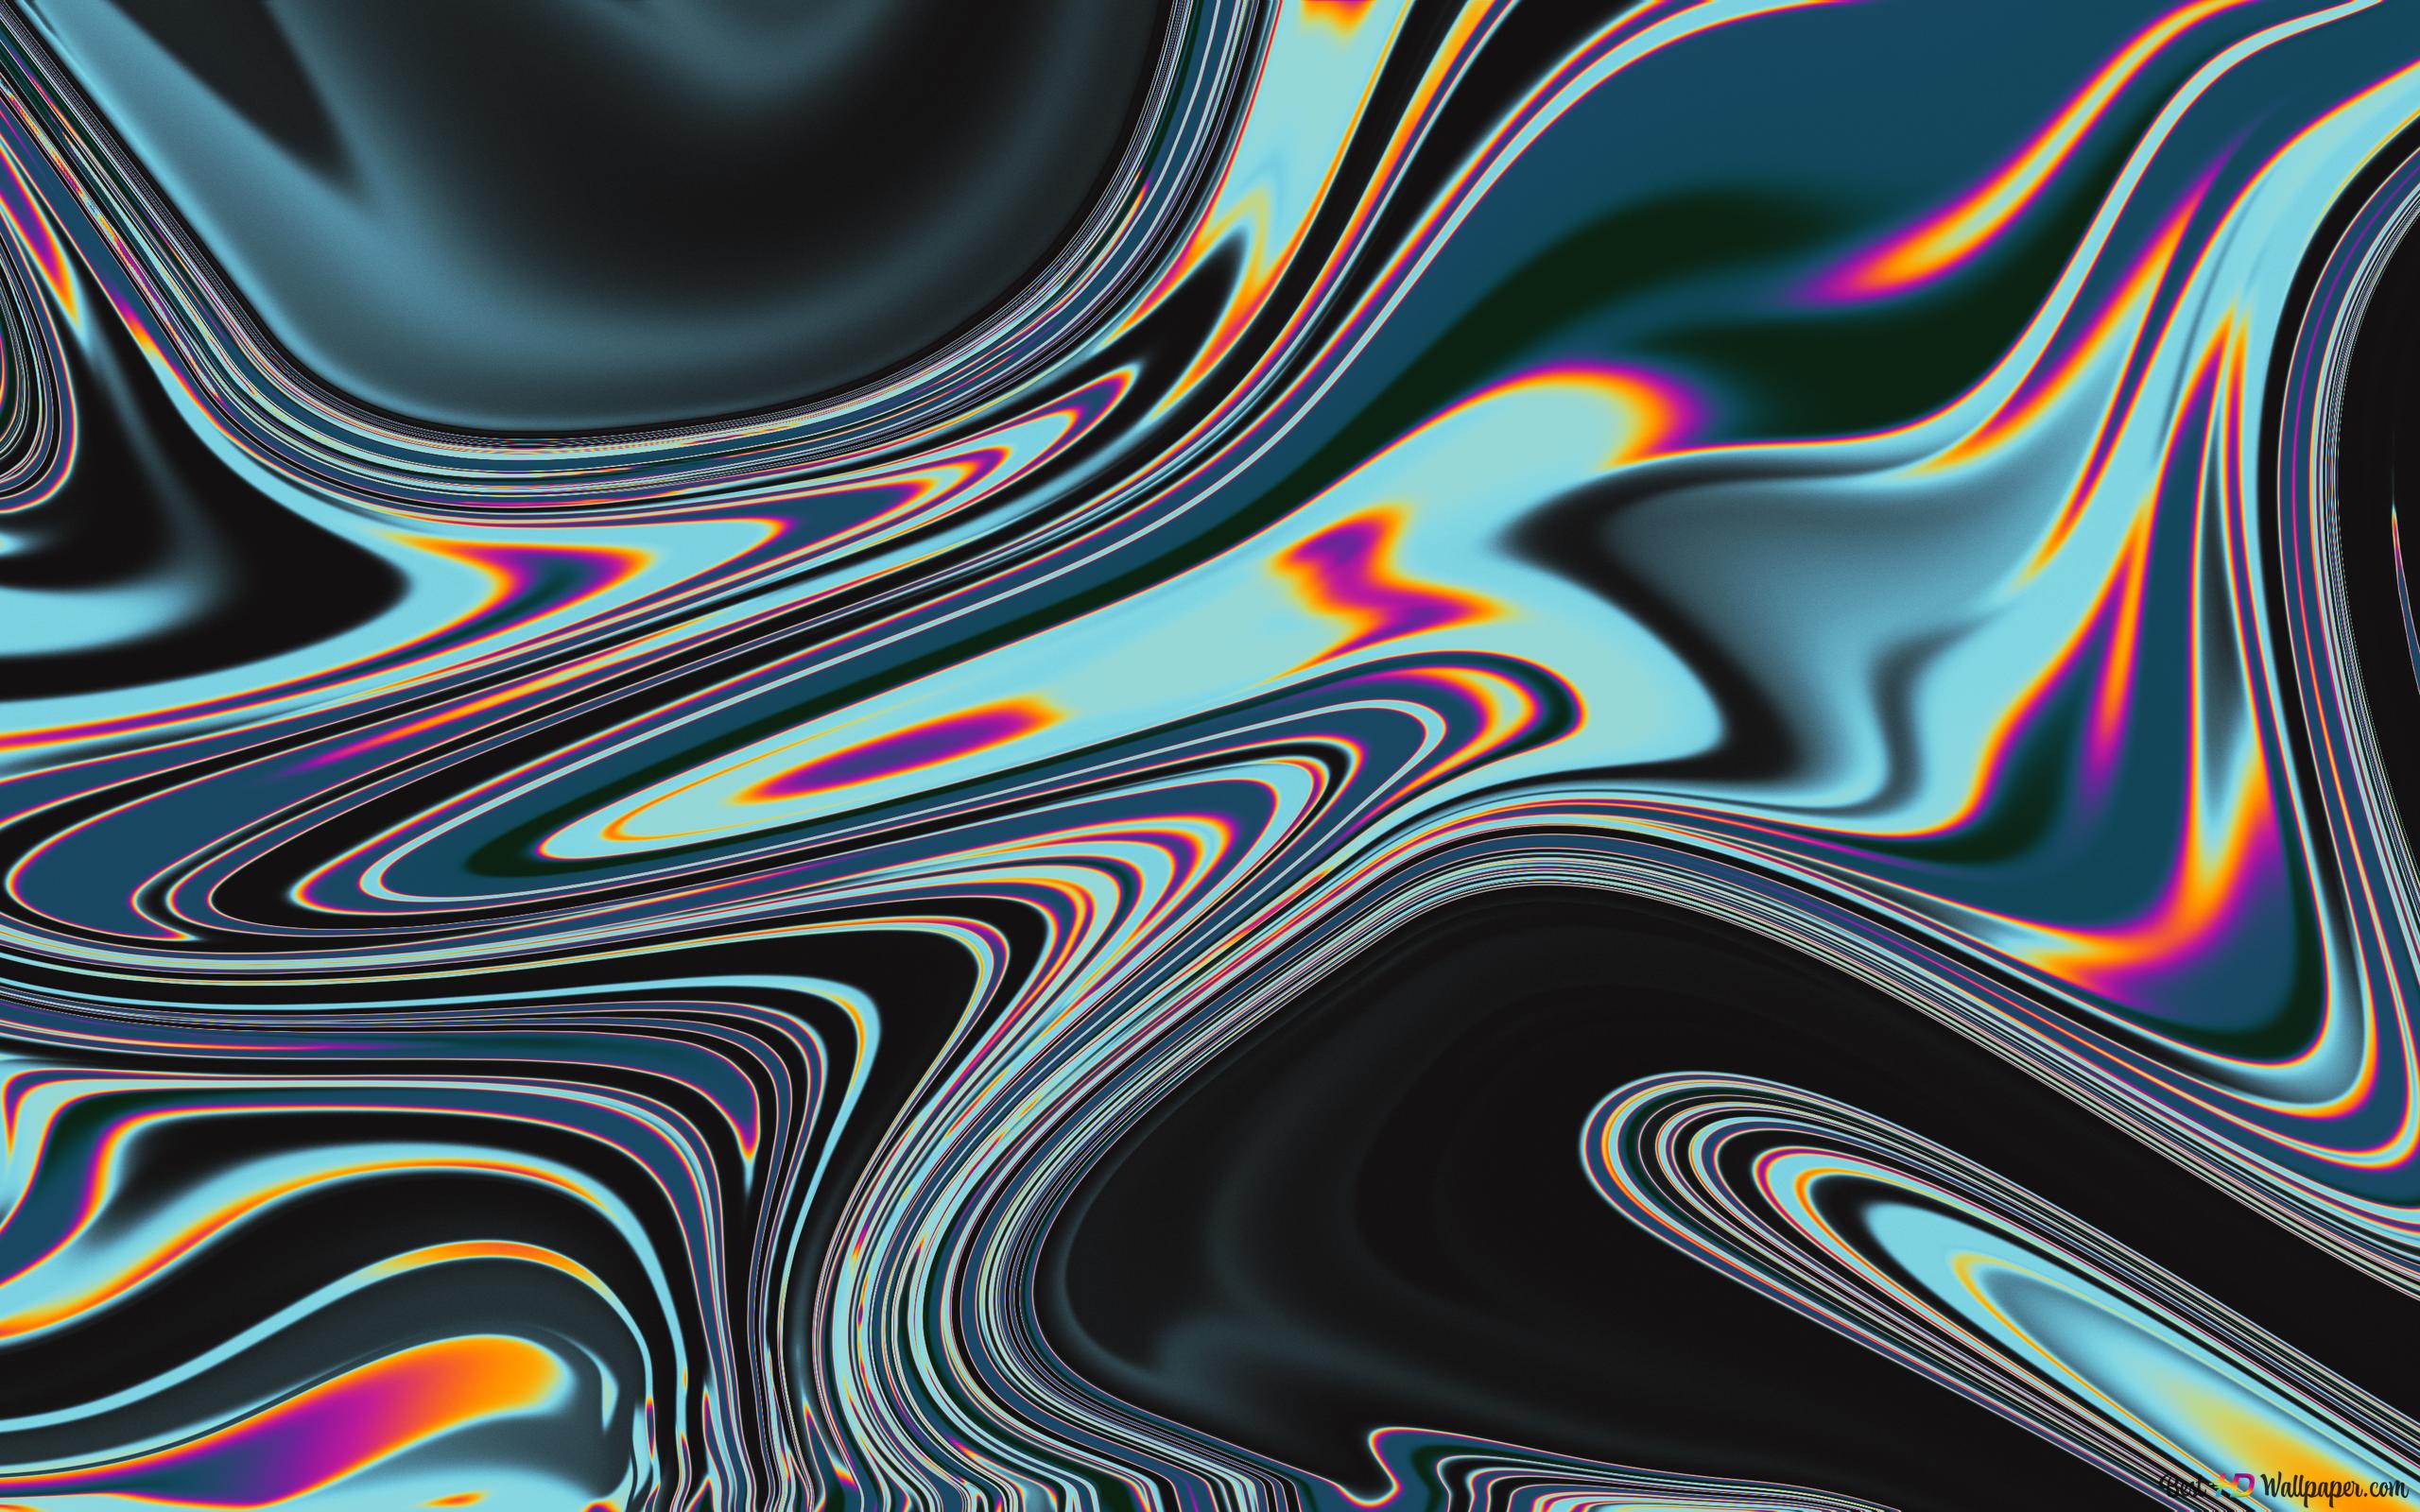 Galaxie Hintergrundbild 2560x1600. Digital art, abstract, colorful, liquid, modern covers psychedelic background aesthetic 4K wallpaper download